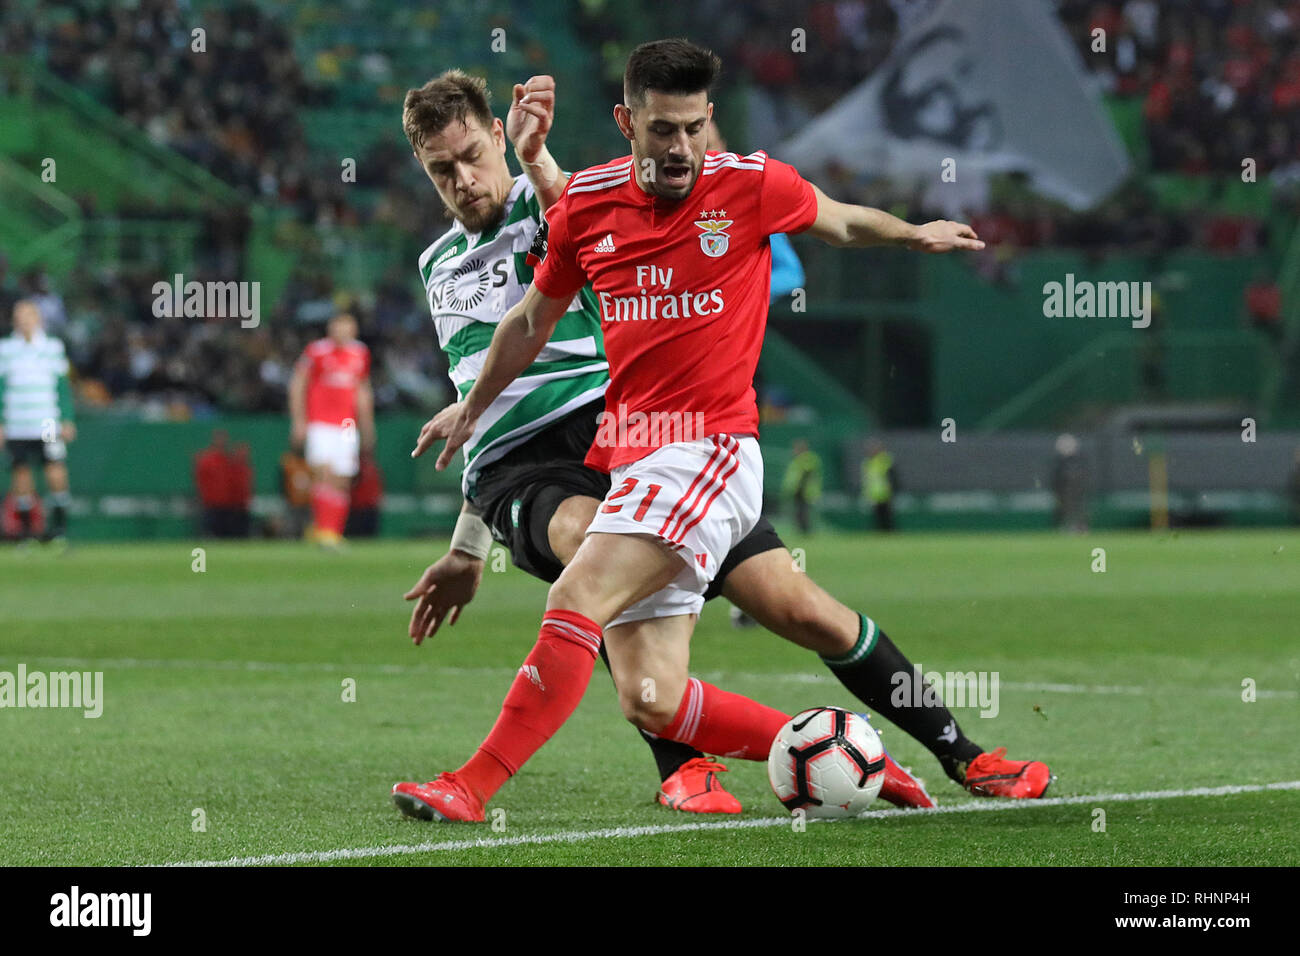 Lisbon, Portugal. 03rd Feb, 2019. Sebastián Coates of Sporting CP (L) vies for the ball with Pizzi of SL Benfica (R) during the League NOS 2018/19 footballl match between Sporting CP vs SL Benfica.  (Final score: Sporting CP 2 - 4 SL Benfica) Credit: SOPA Images Limited/Alamy Live News Stock Photo